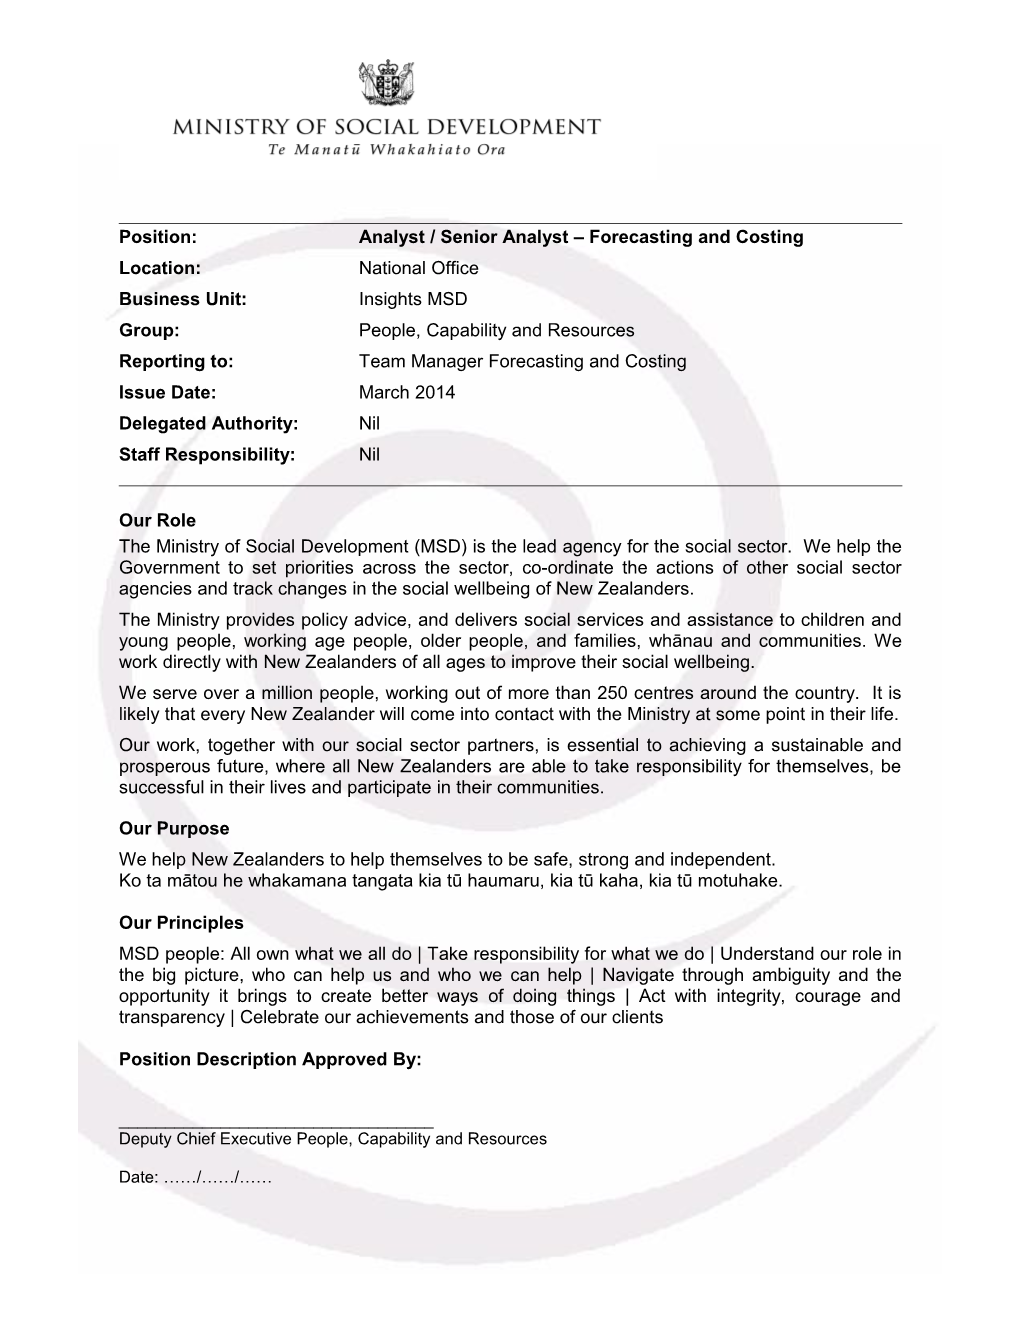 Position:Analyst / Senior Analyst Forecasting and Costing